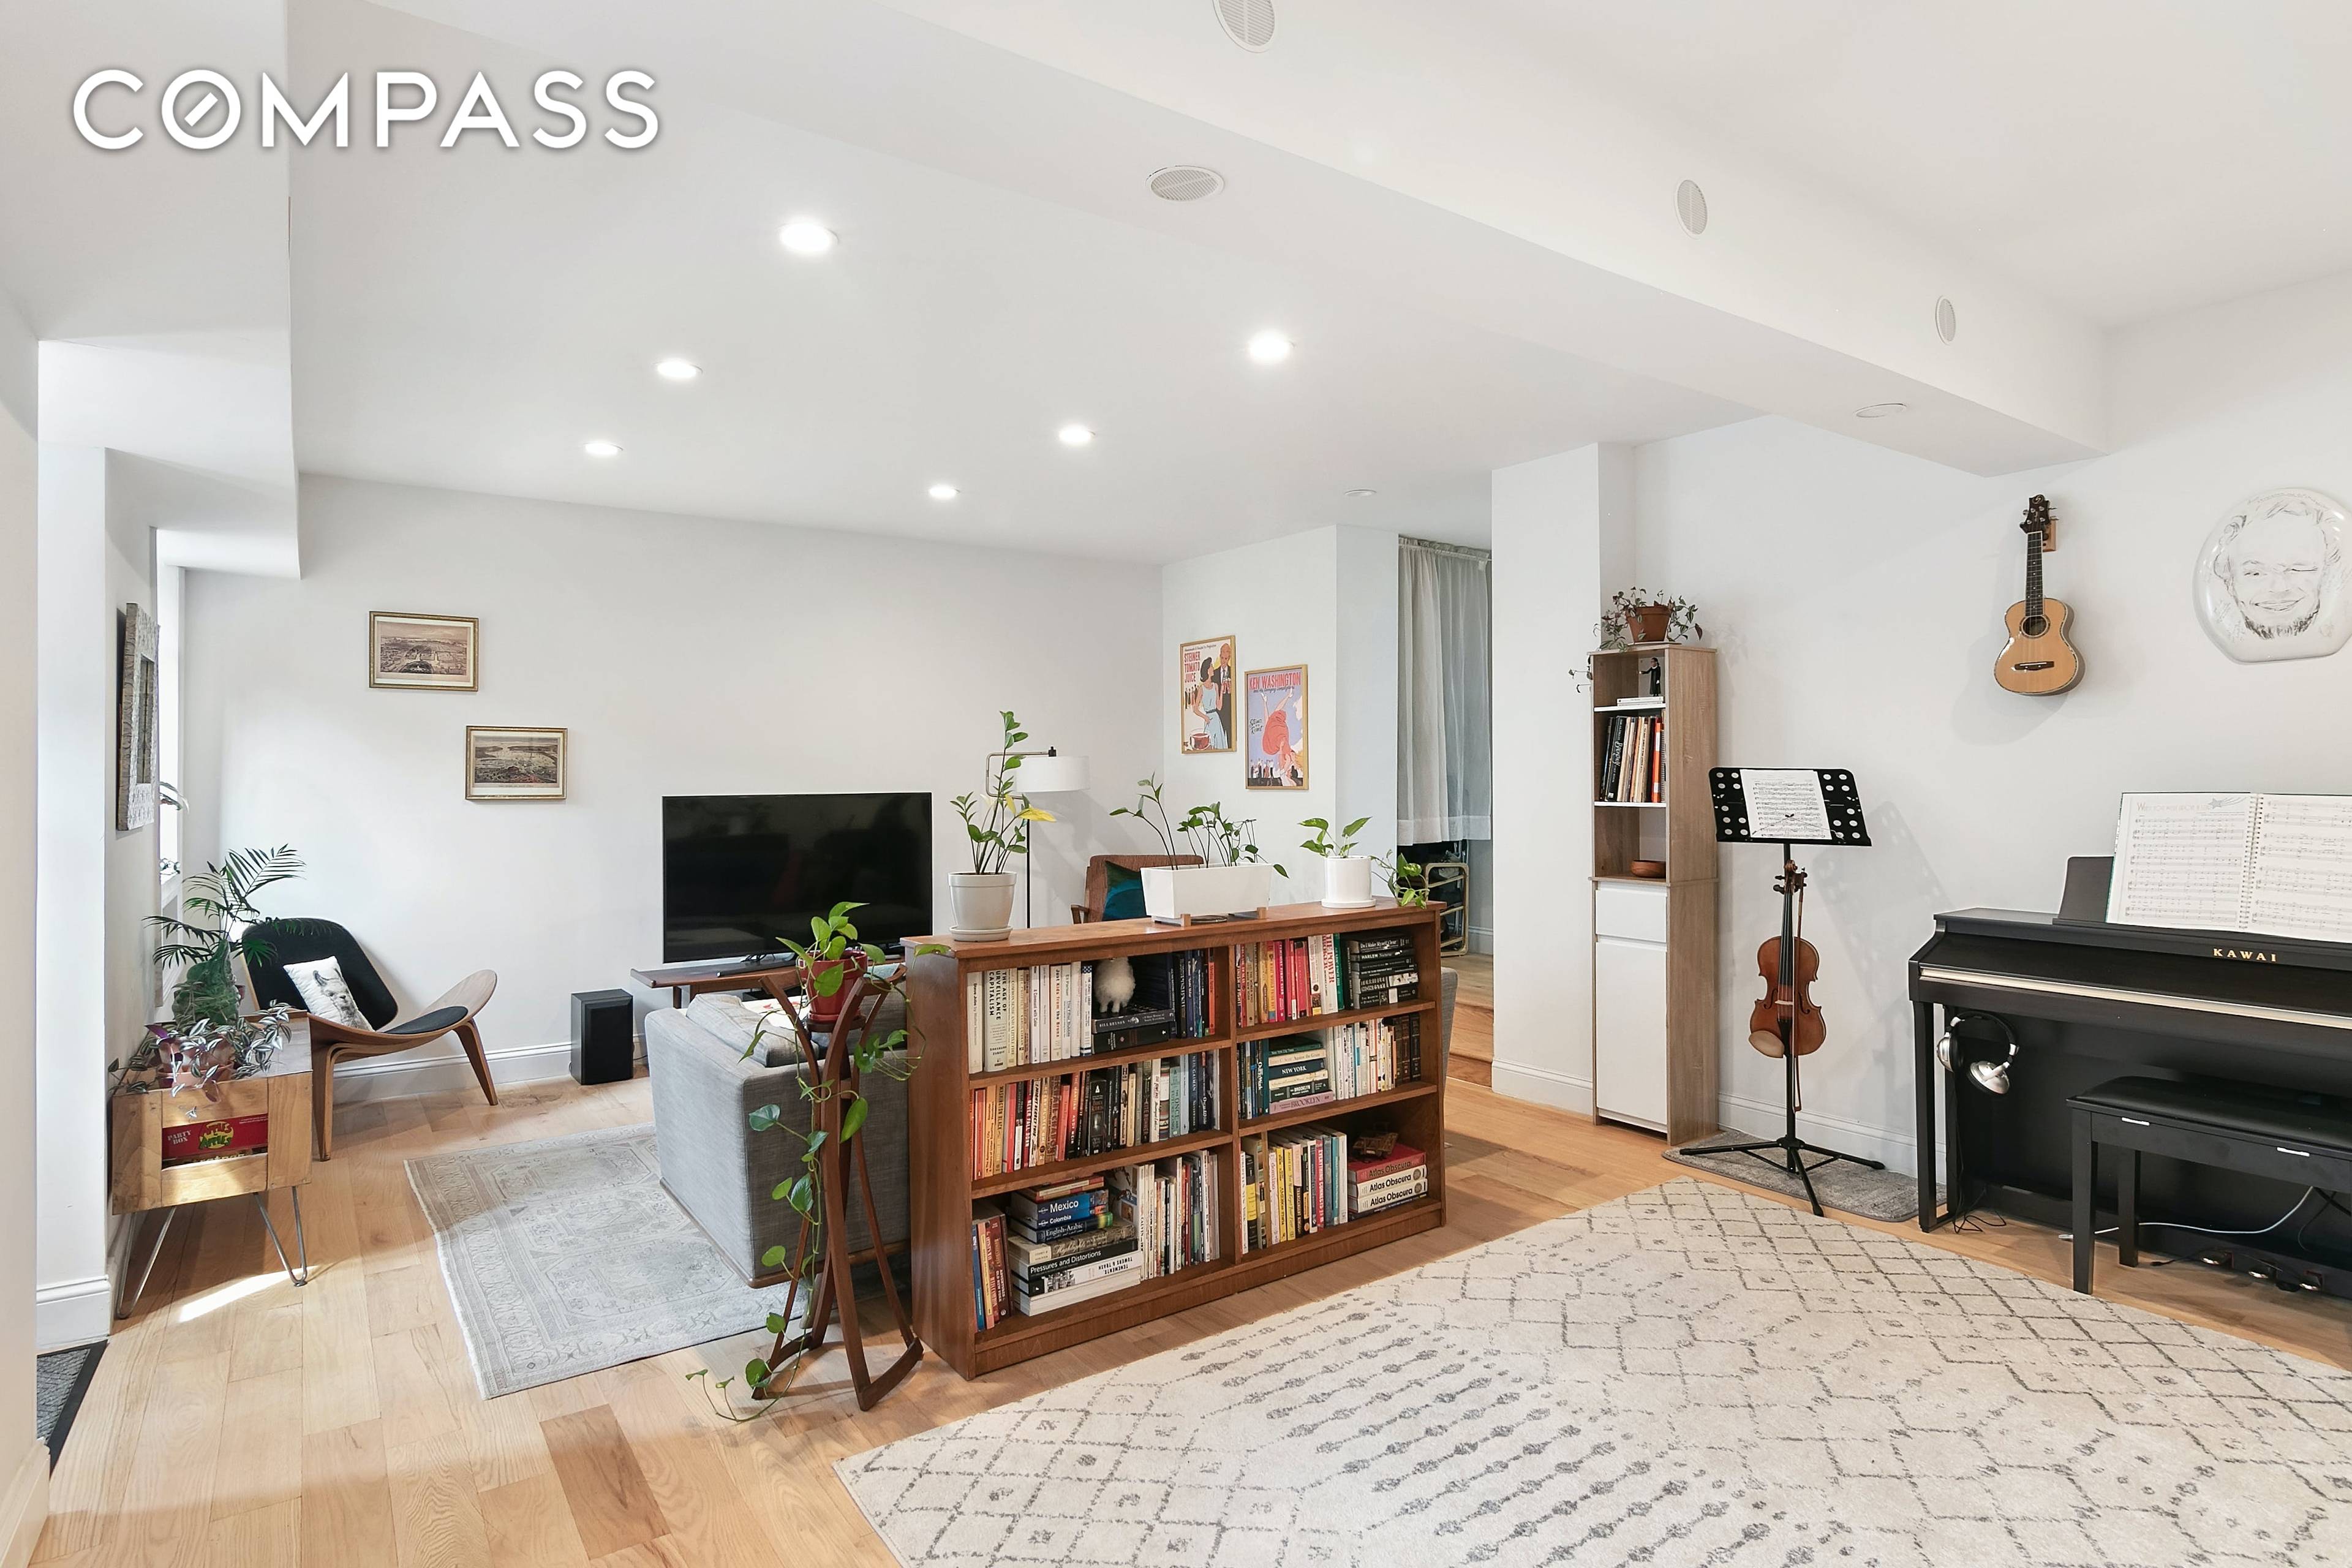 430 Clinton Ave, unit 1G is located in a beautiful pre war building on a landmark block right on the boarder of Clinton Hill and Fort Greene.